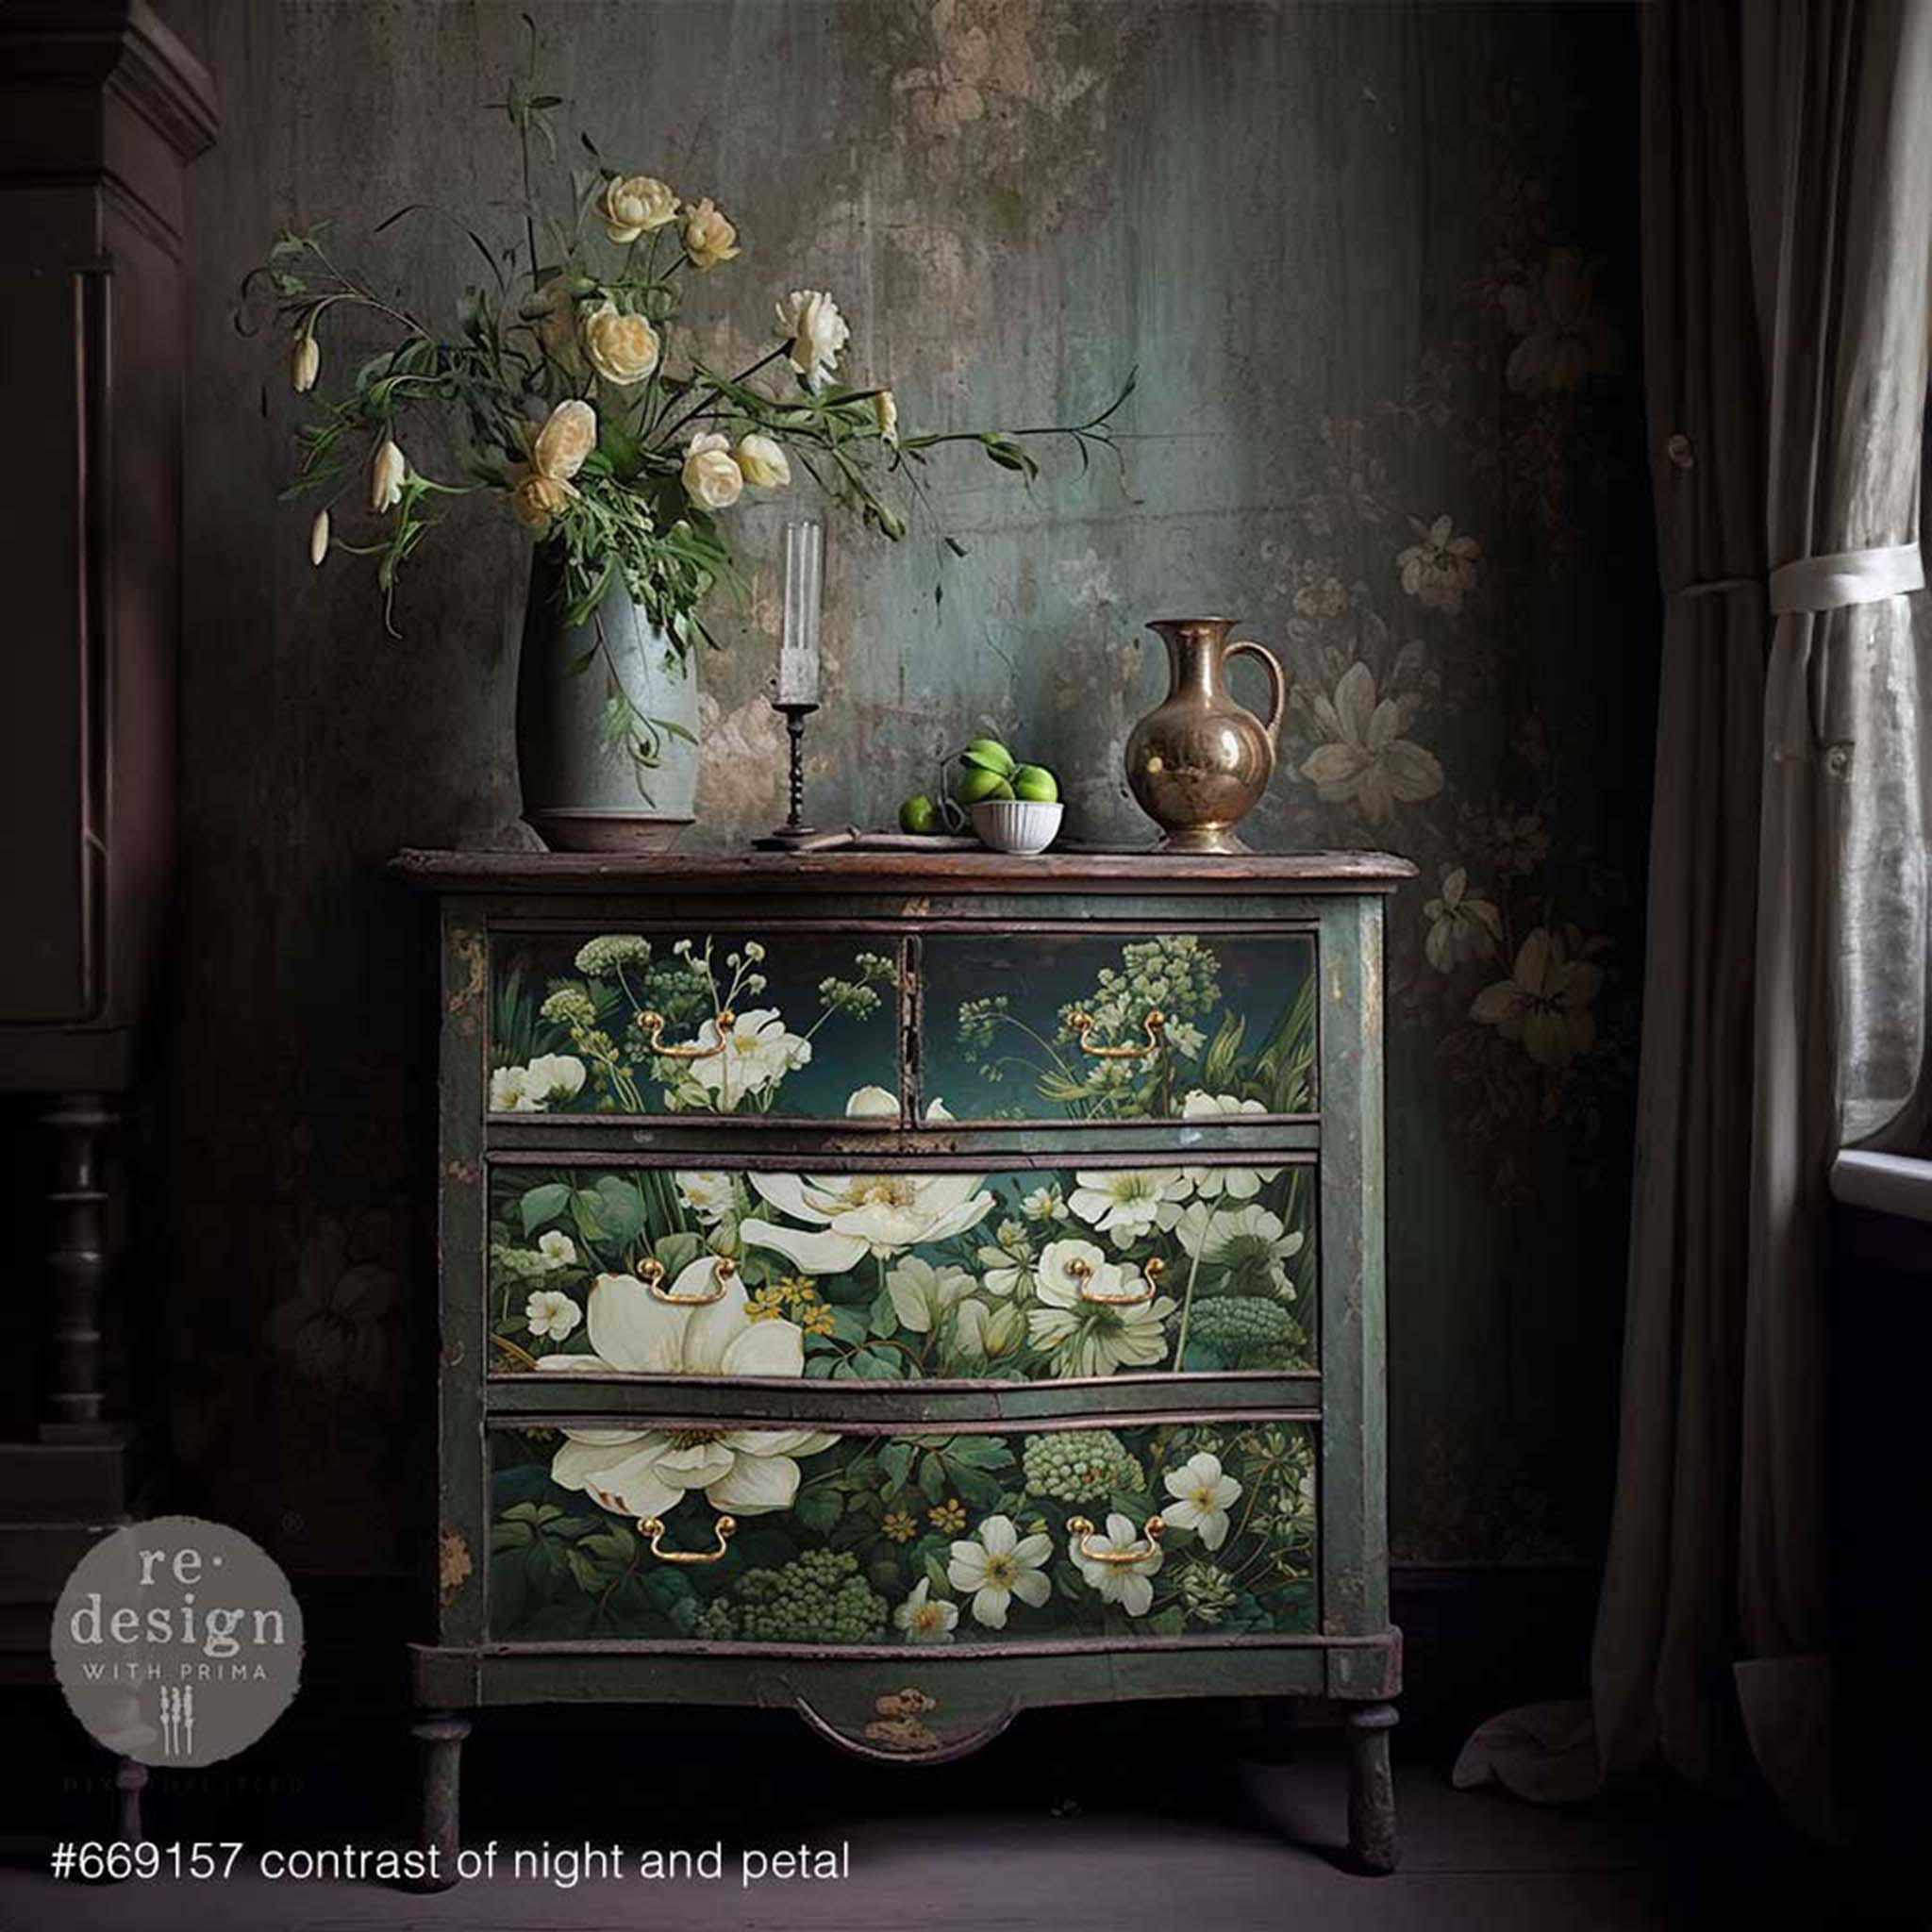 A vintage dresser is painted deep green and features ReDesign with Prima's Contrast of Night and Petal A1 fiber paper on its 4 drawers.